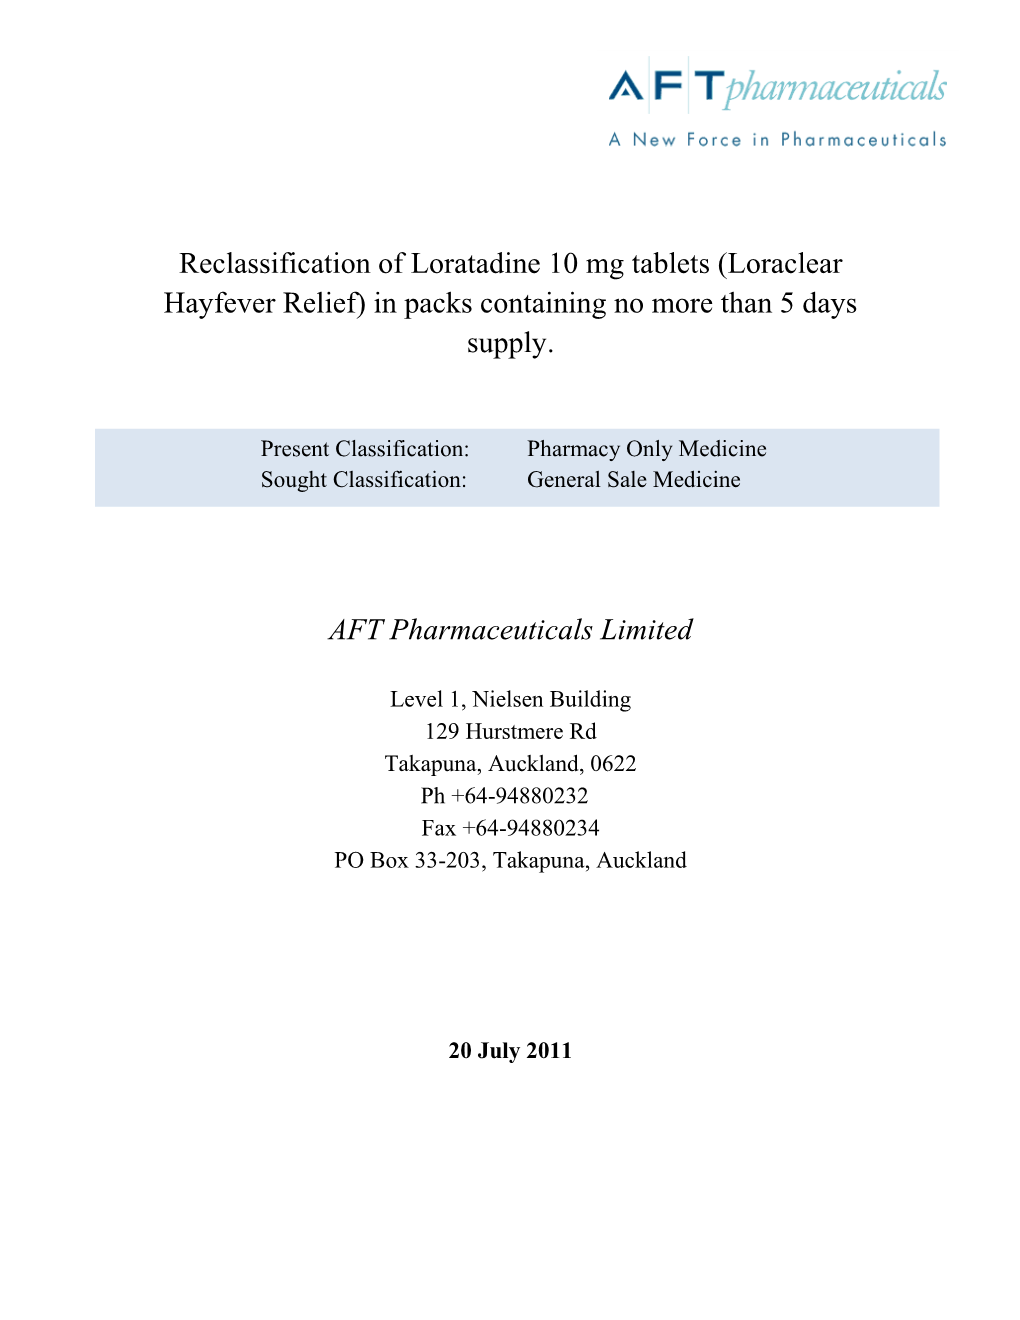 Reclassification of Loratadine 10 Mg Tablets (Loraclear Hayfever Relief) in Packs Containing No More Than 5 Days Supply